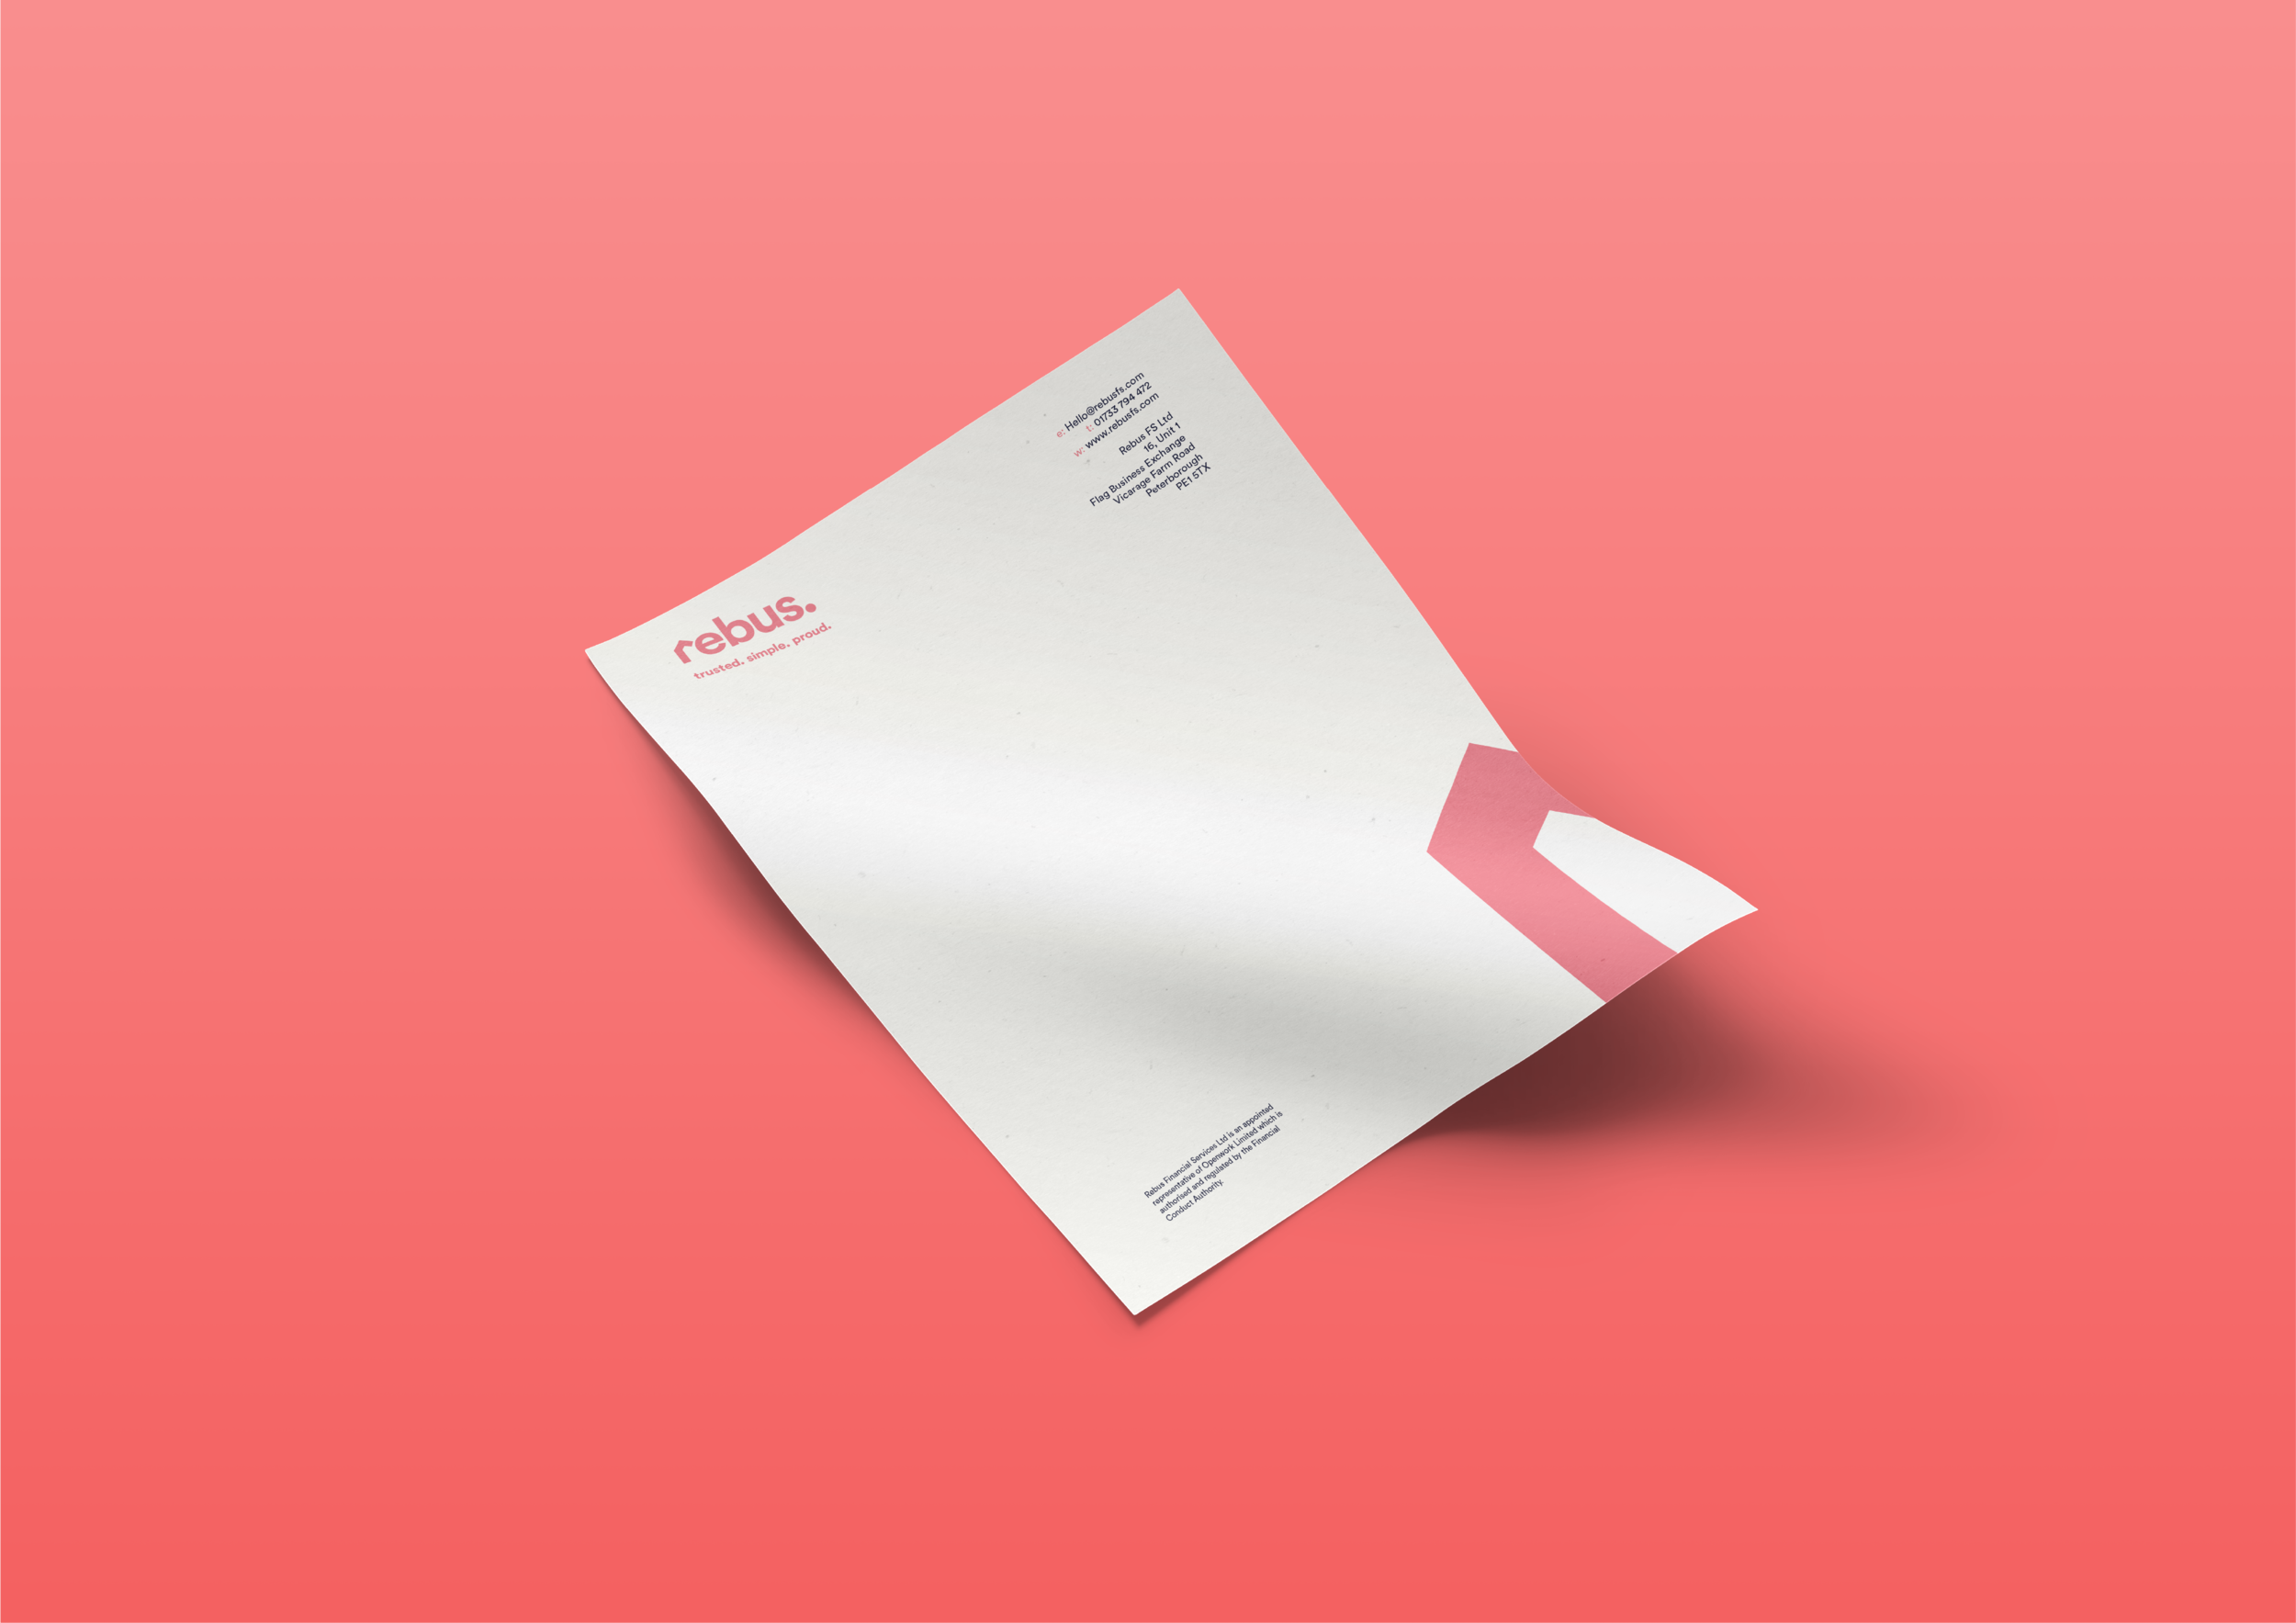 Branding company UK - White A4 rebus branded paper in grapefruit colour background